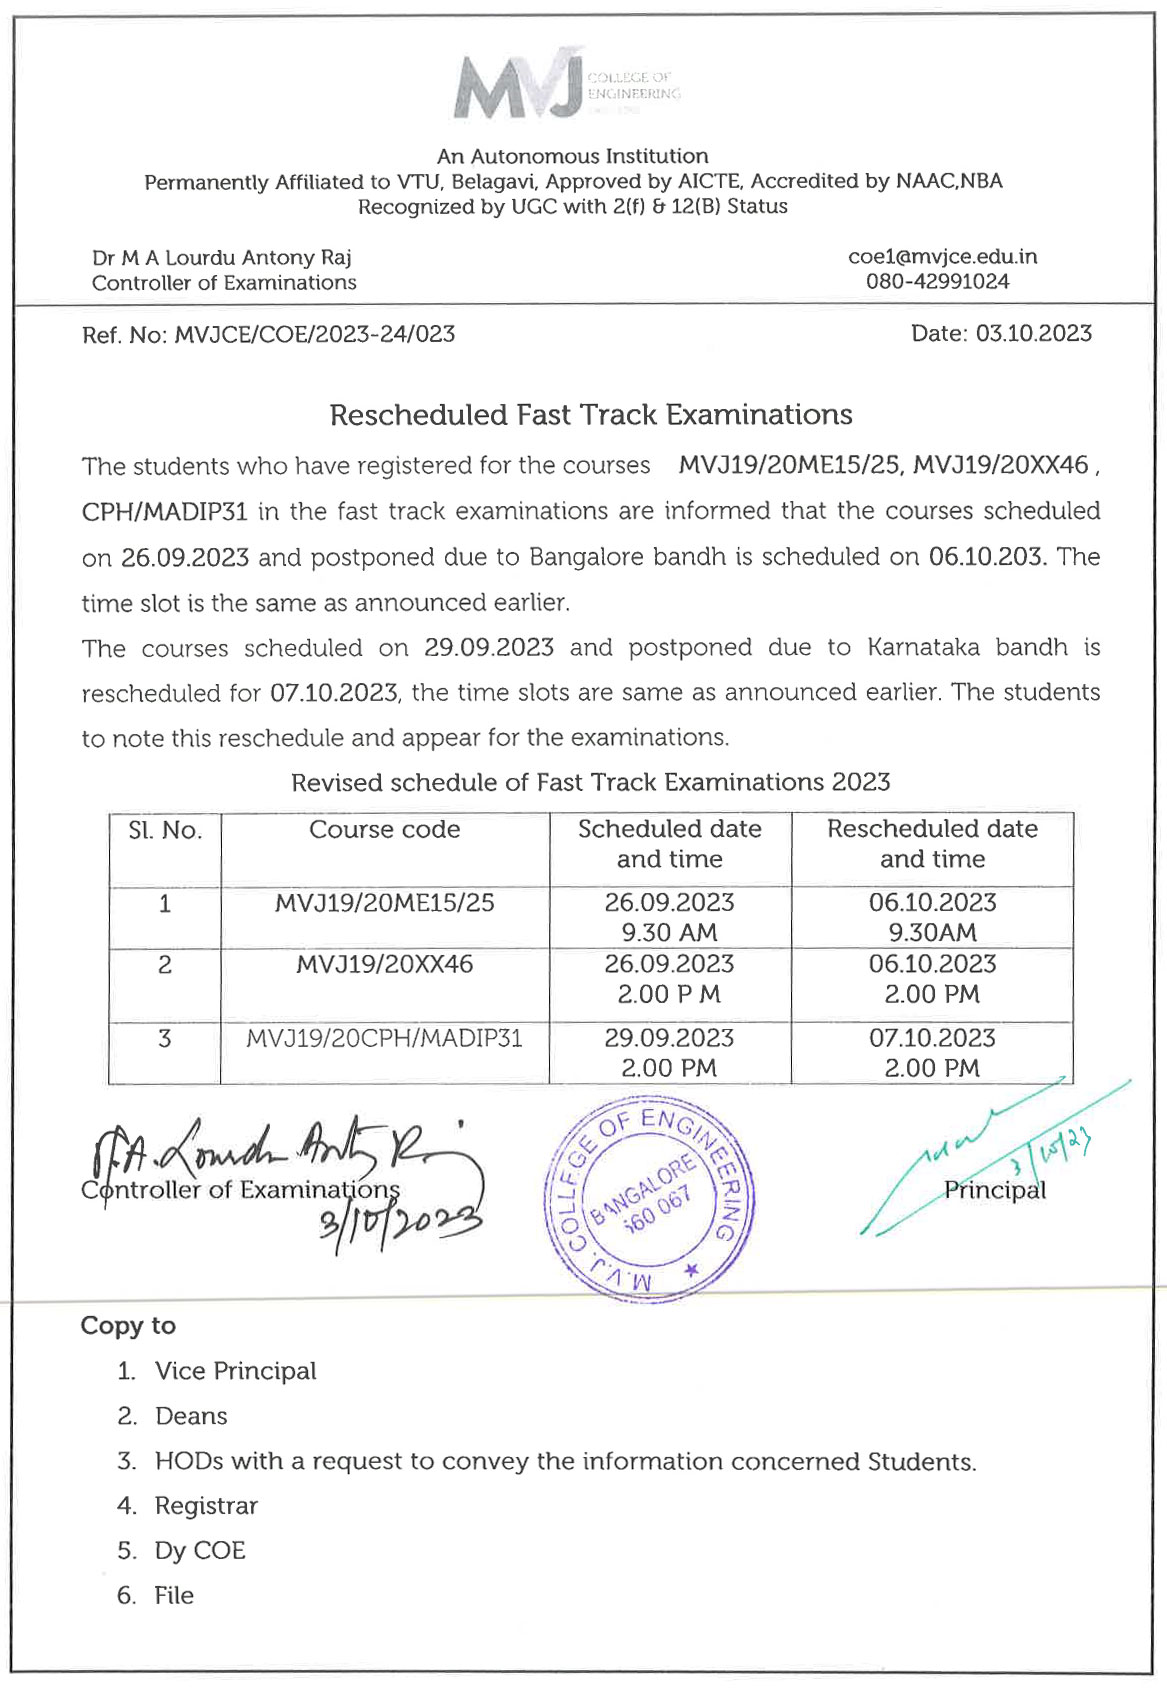 Rescheduled fast Track examinations